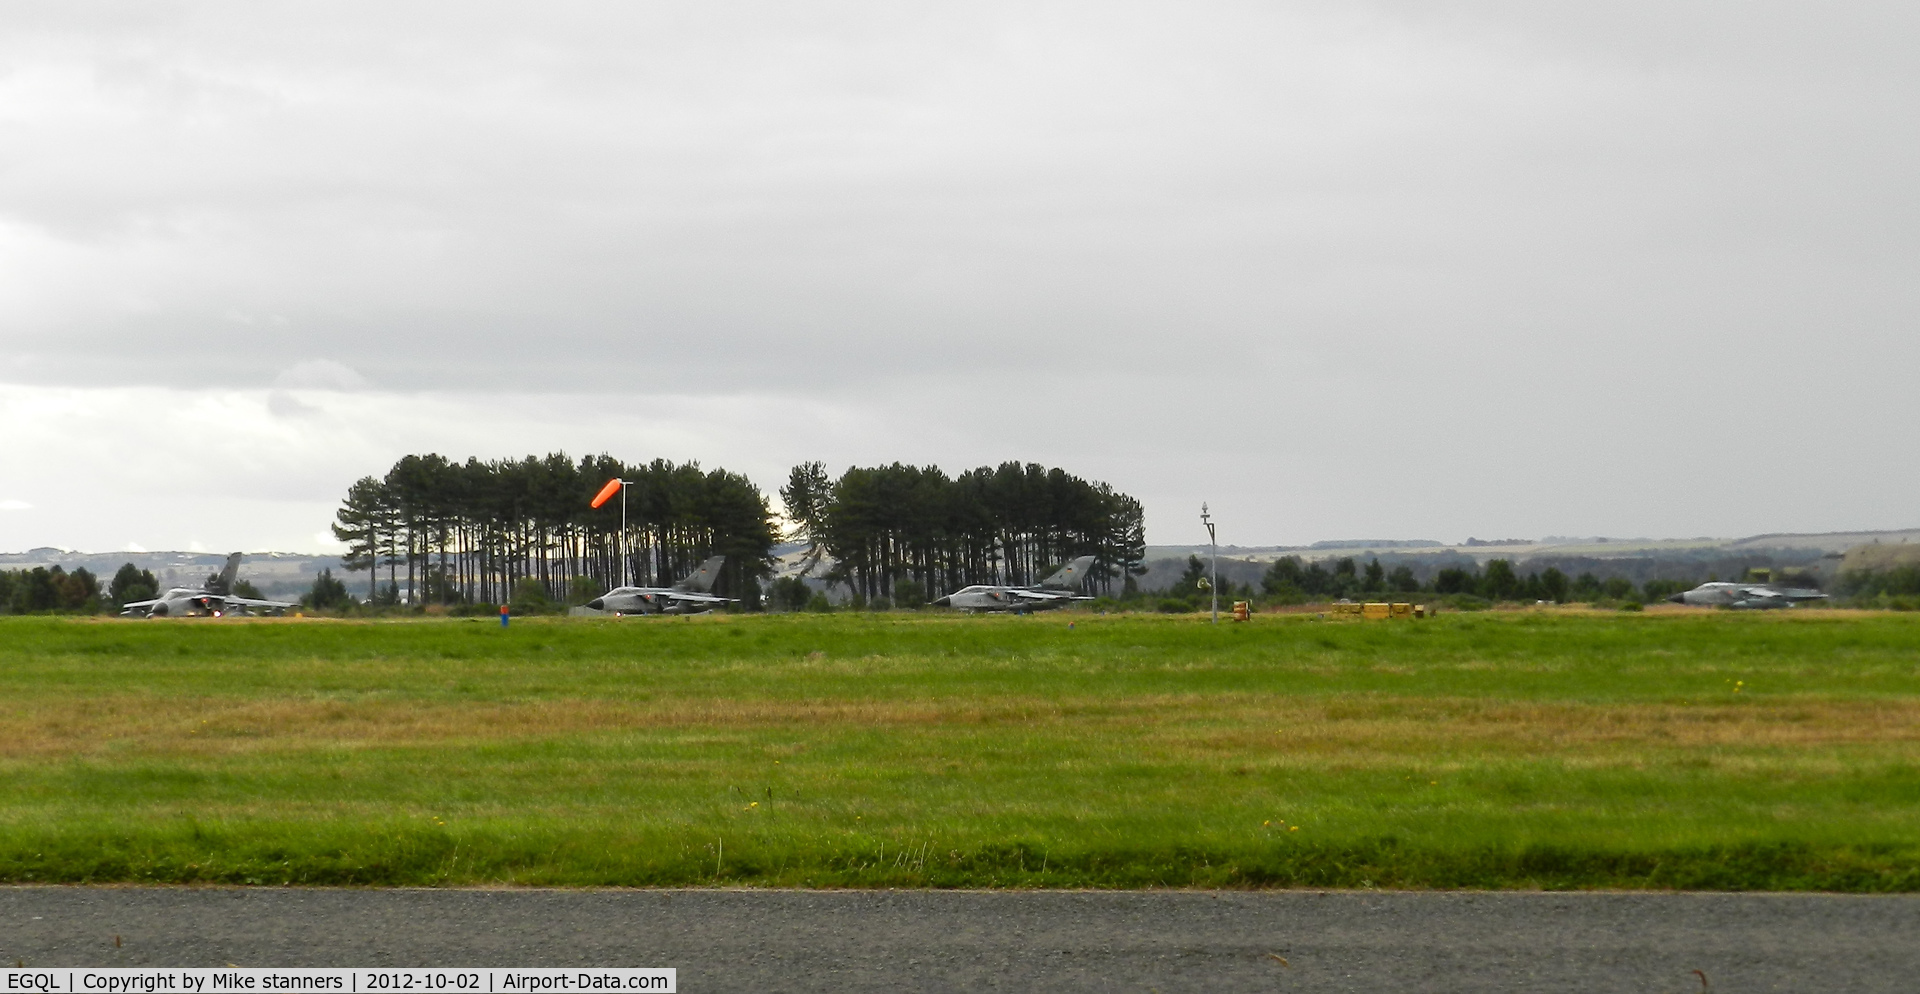 RAF Leuchars Airport, Leuchars, Scotland United Kingdom (EGQL) - JBG-32 Tornado ECR's 46+56,46+36,46+35 & a single Tornado IDS 44+90 From AG-51 ,On the right,taxi out to runway 27 for an afternoon joint warrior mission